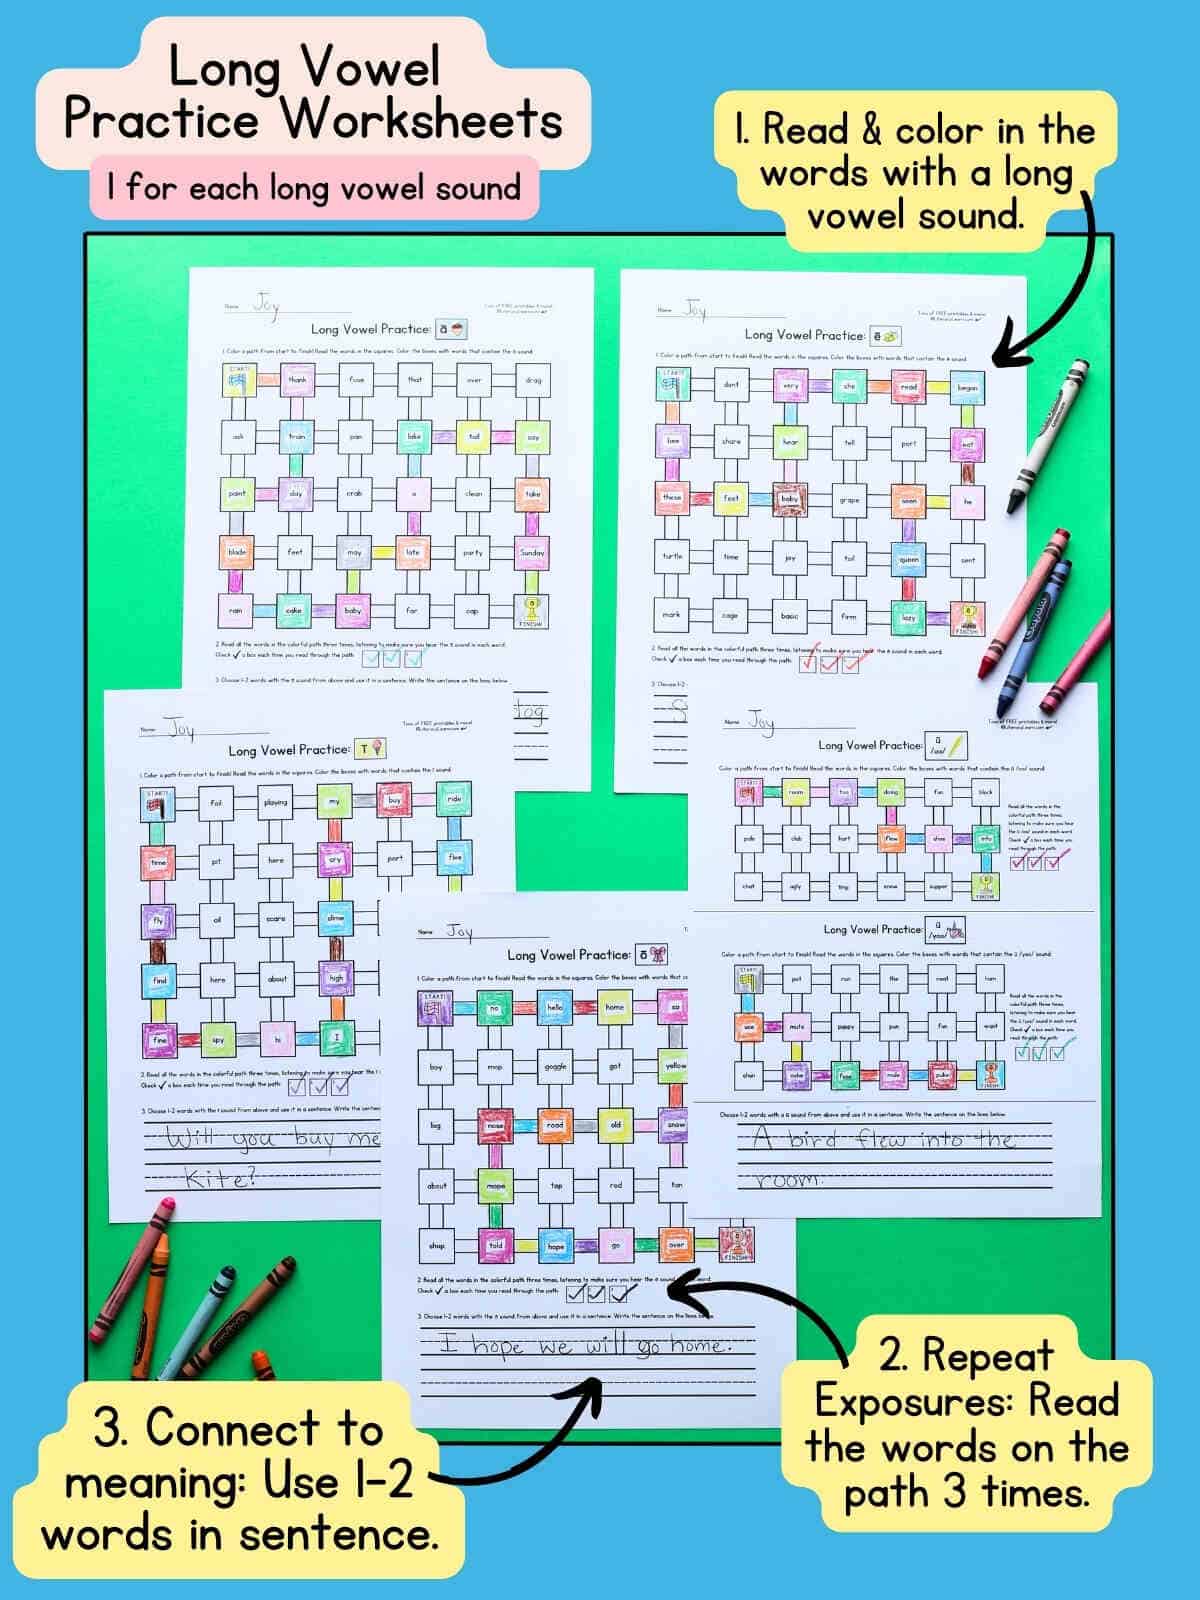 Graphic showing all 5 long vowel worksheets with the steps to use them.